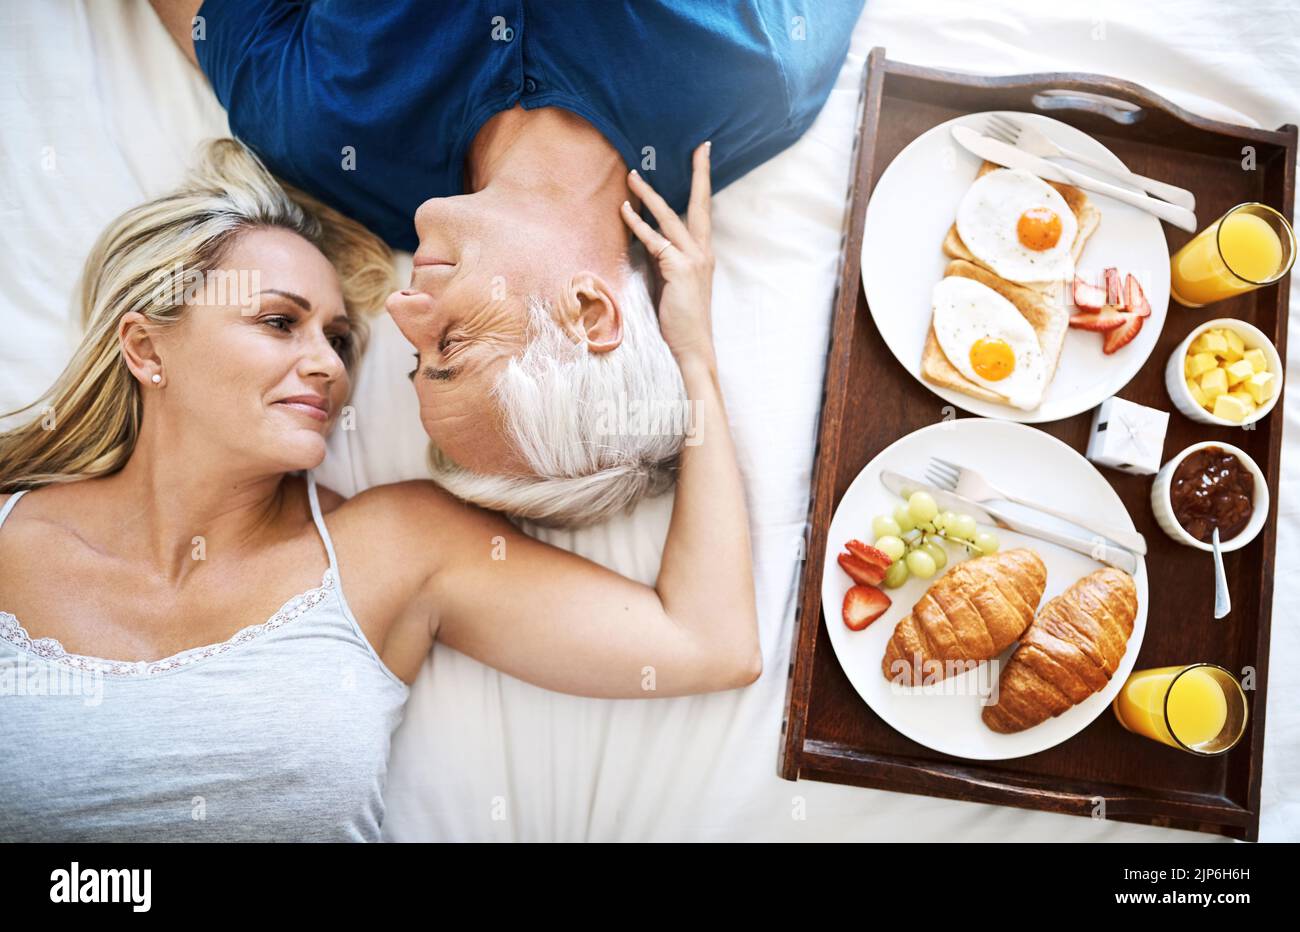 Love Is Filled With The Sweetest Moments An Affectionate Mature Couple Enjoying Breakfast In